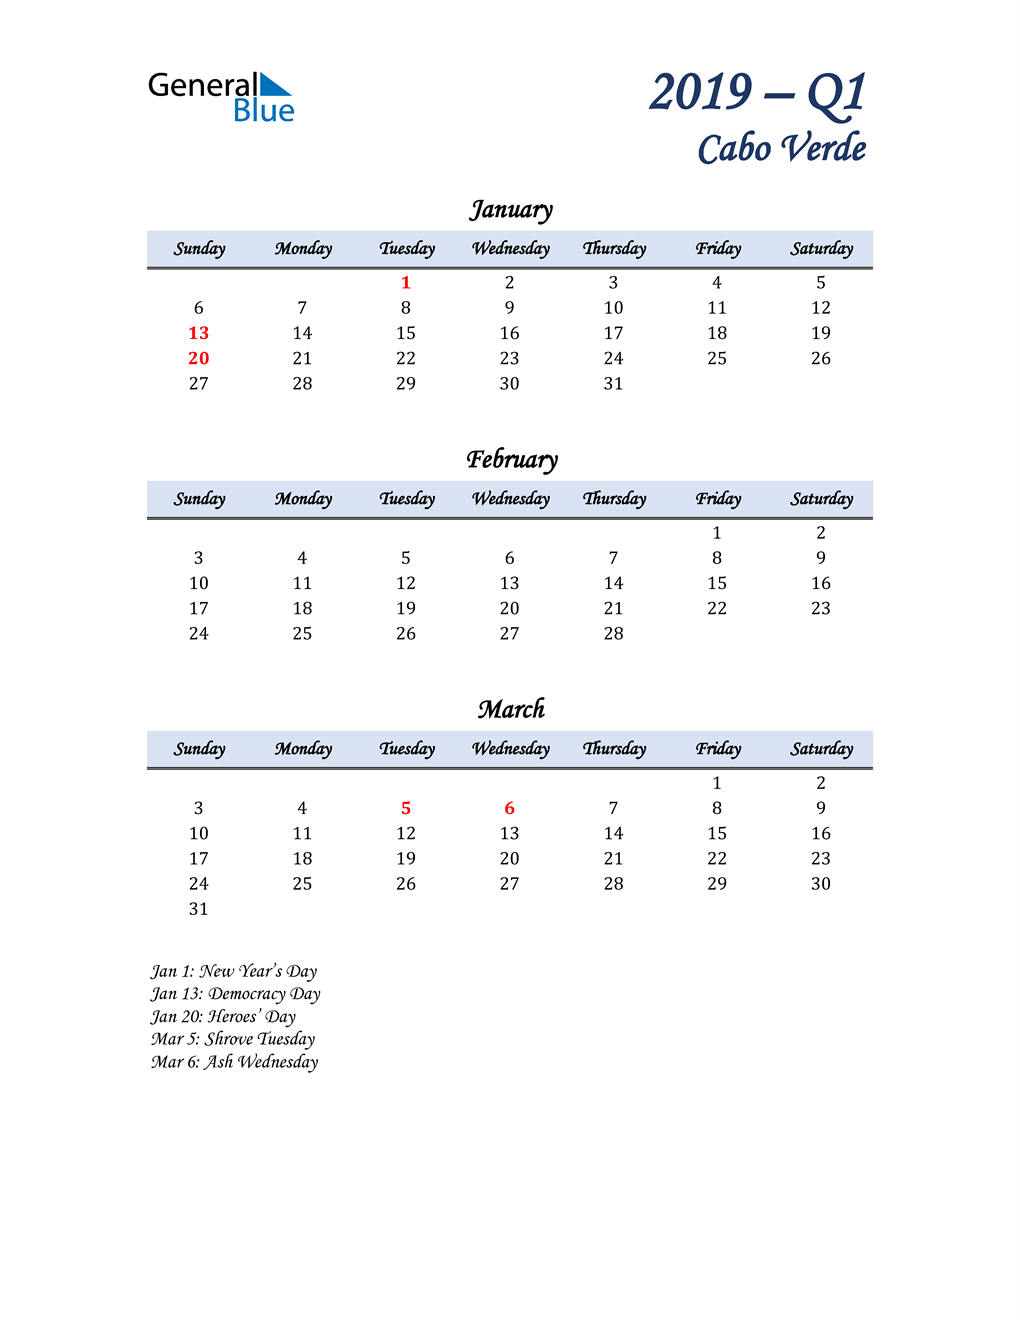  January, February, and March Calendar for Cabo Verde